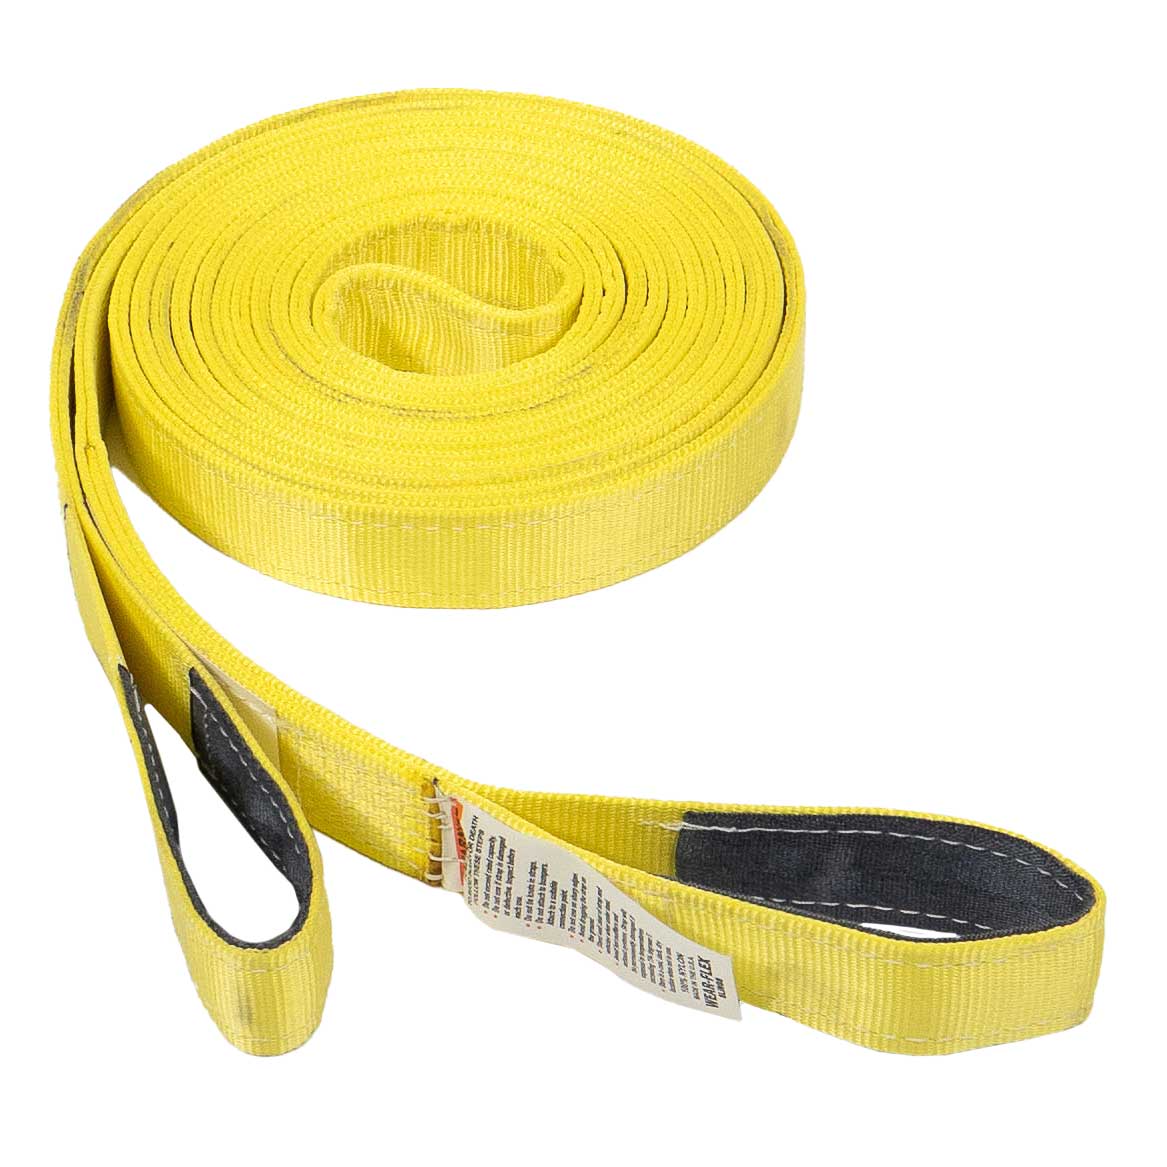 2 x 20' Recovery Strap with Cordura Eyes - 2 Ply